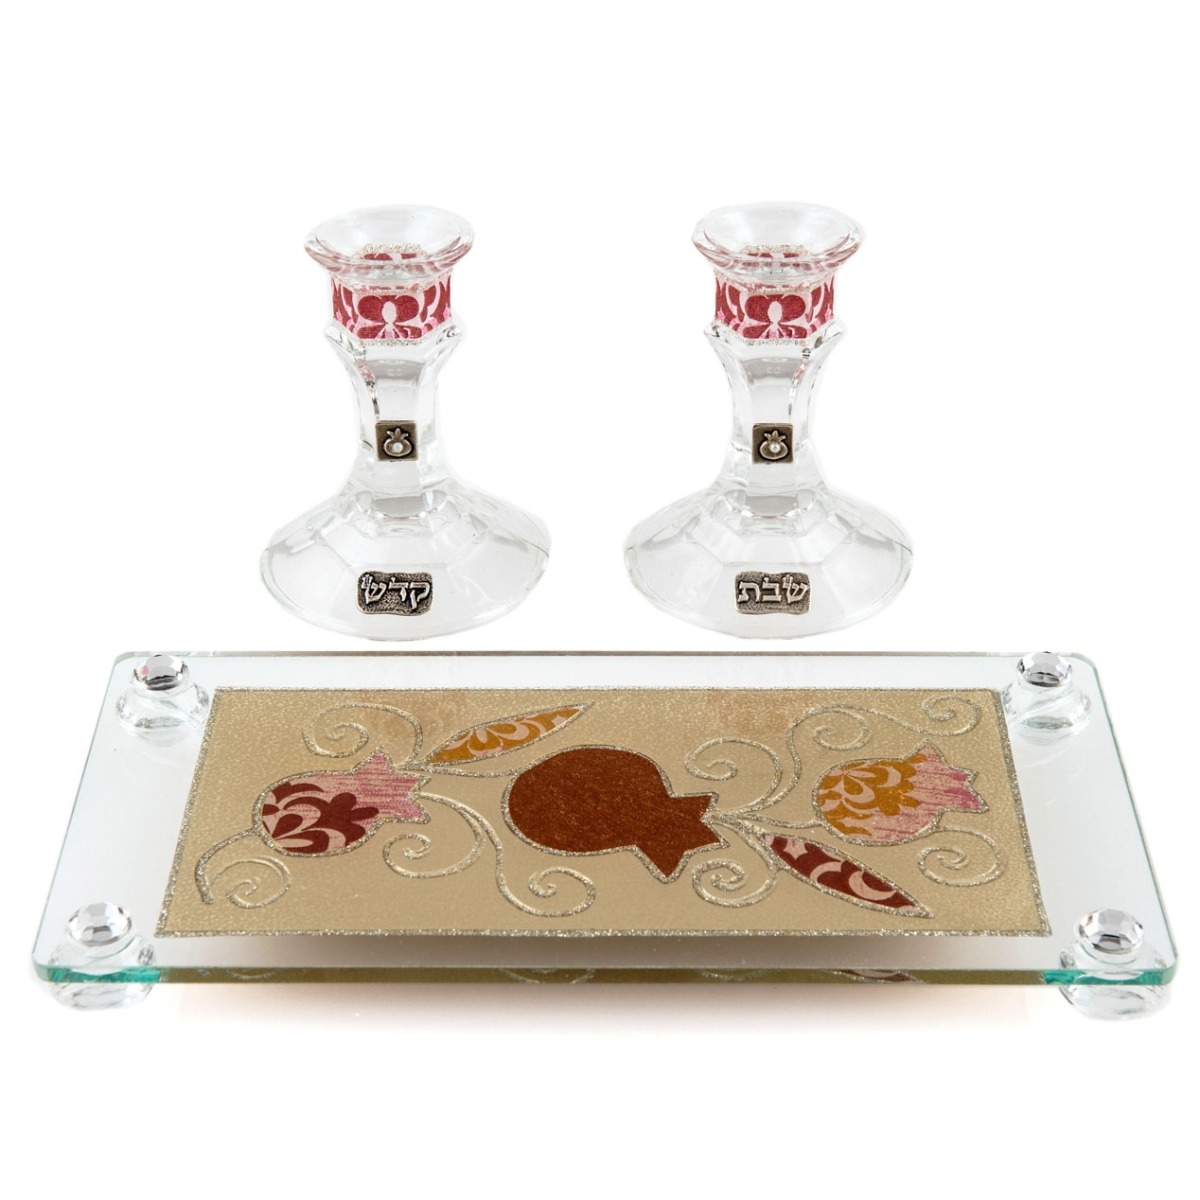 Painted Crystal Candlesticks with Tray: Pomegranates. Lily Art - 1